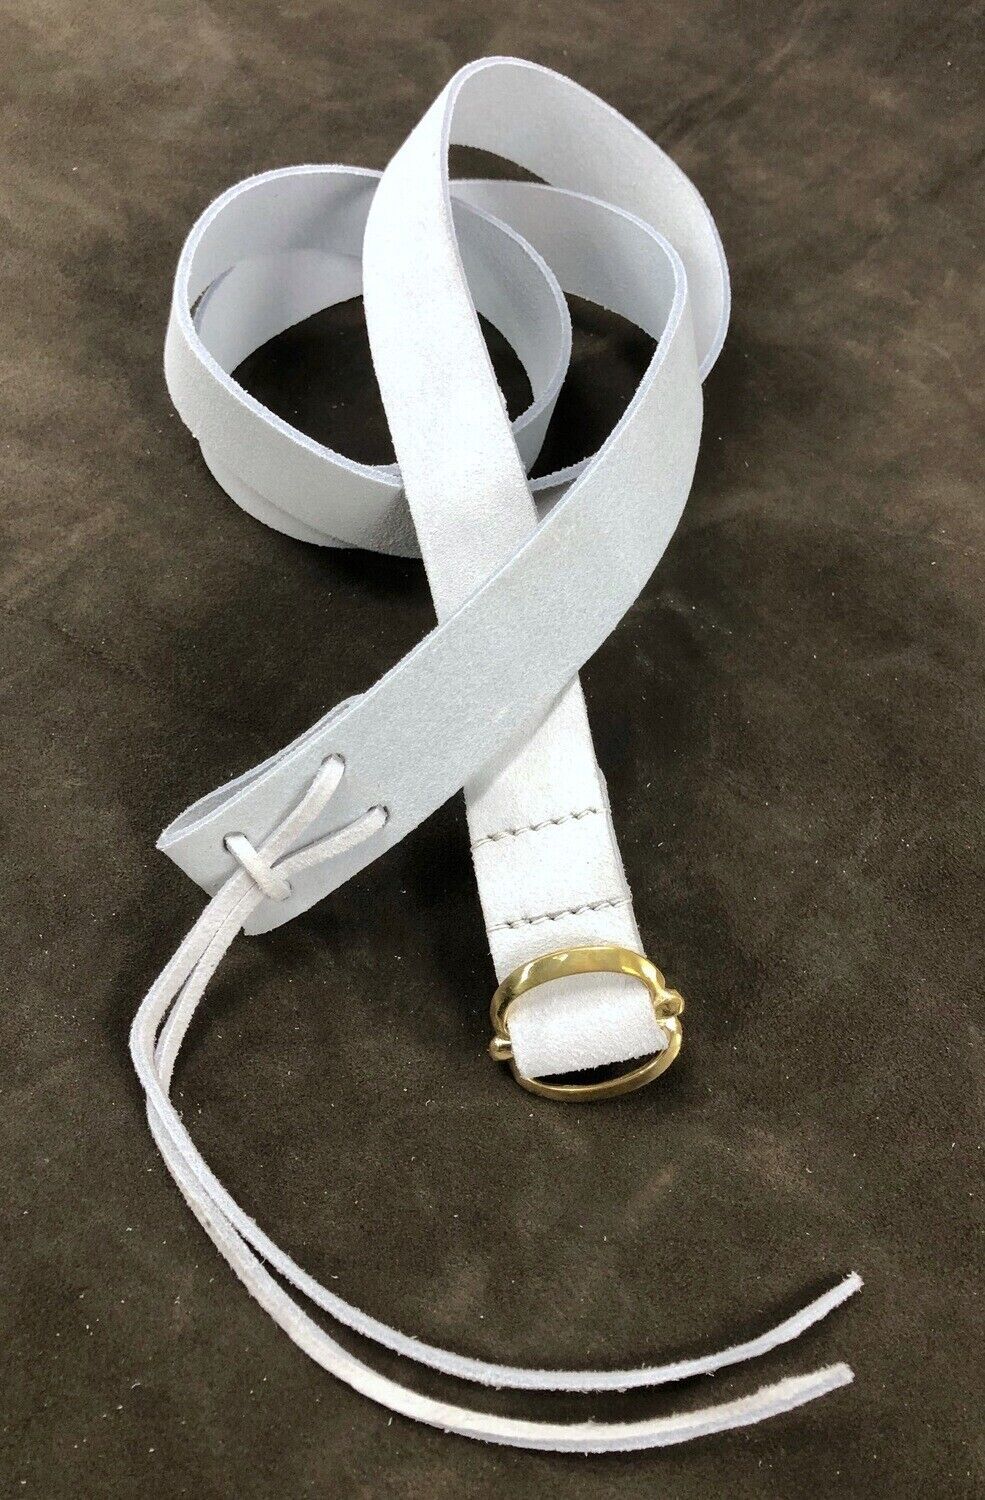 White Buff Leather Musket Sling with Buckle for Flintlock Muskets - F&I, Rev War Без бренда - фотография #3